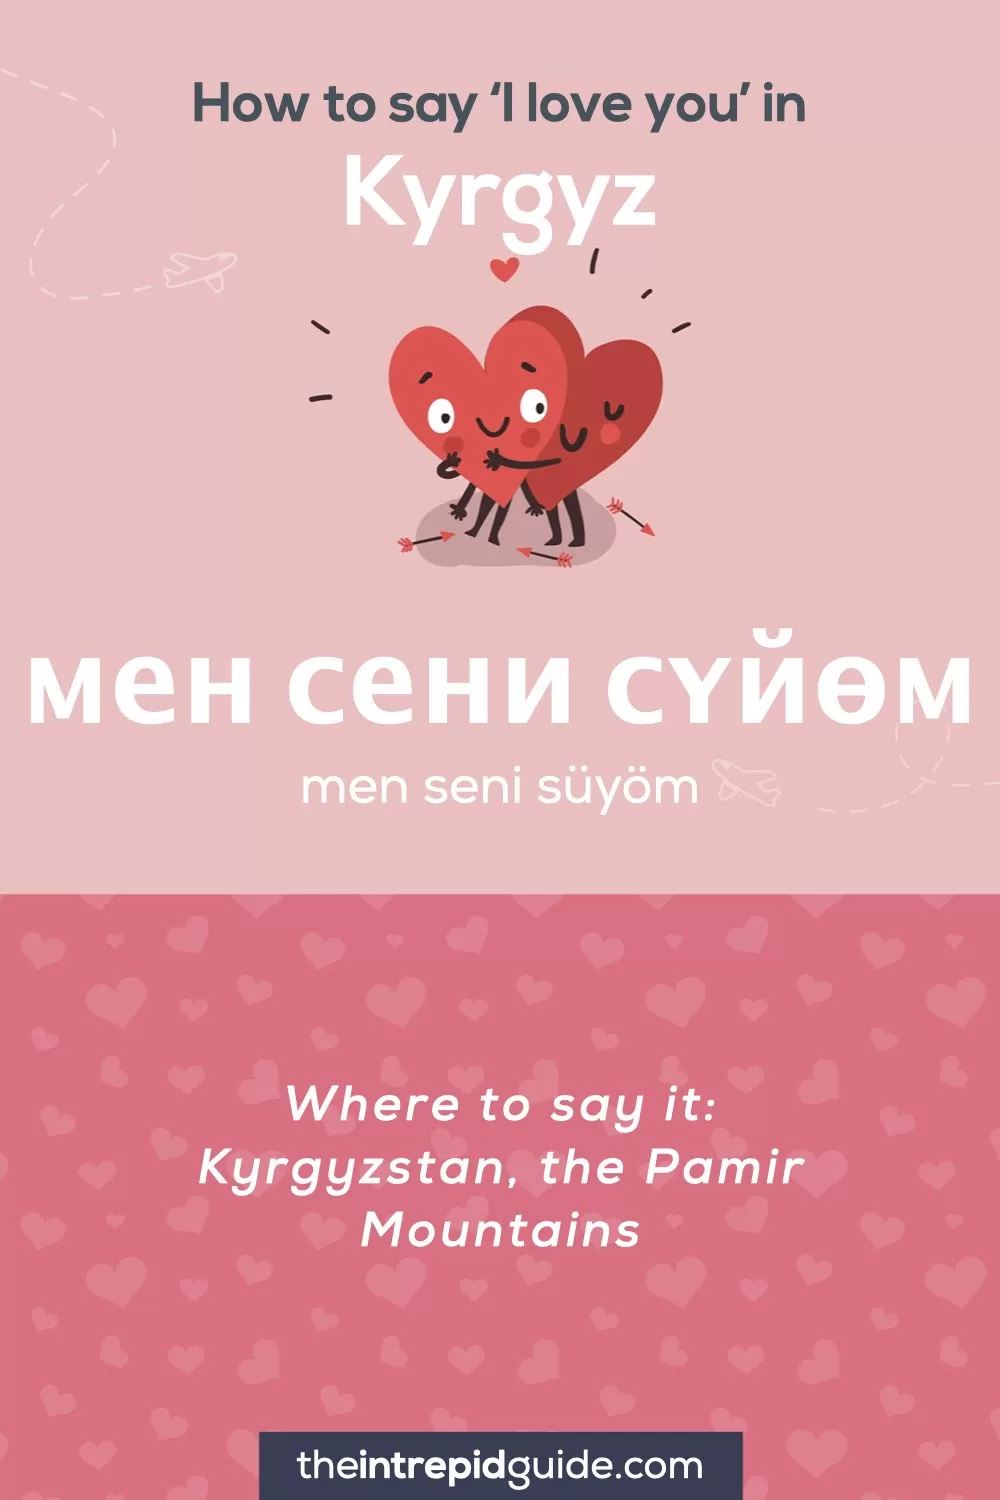 How to say I love you in different languages - Kyrgyz - мен сени сүйөм